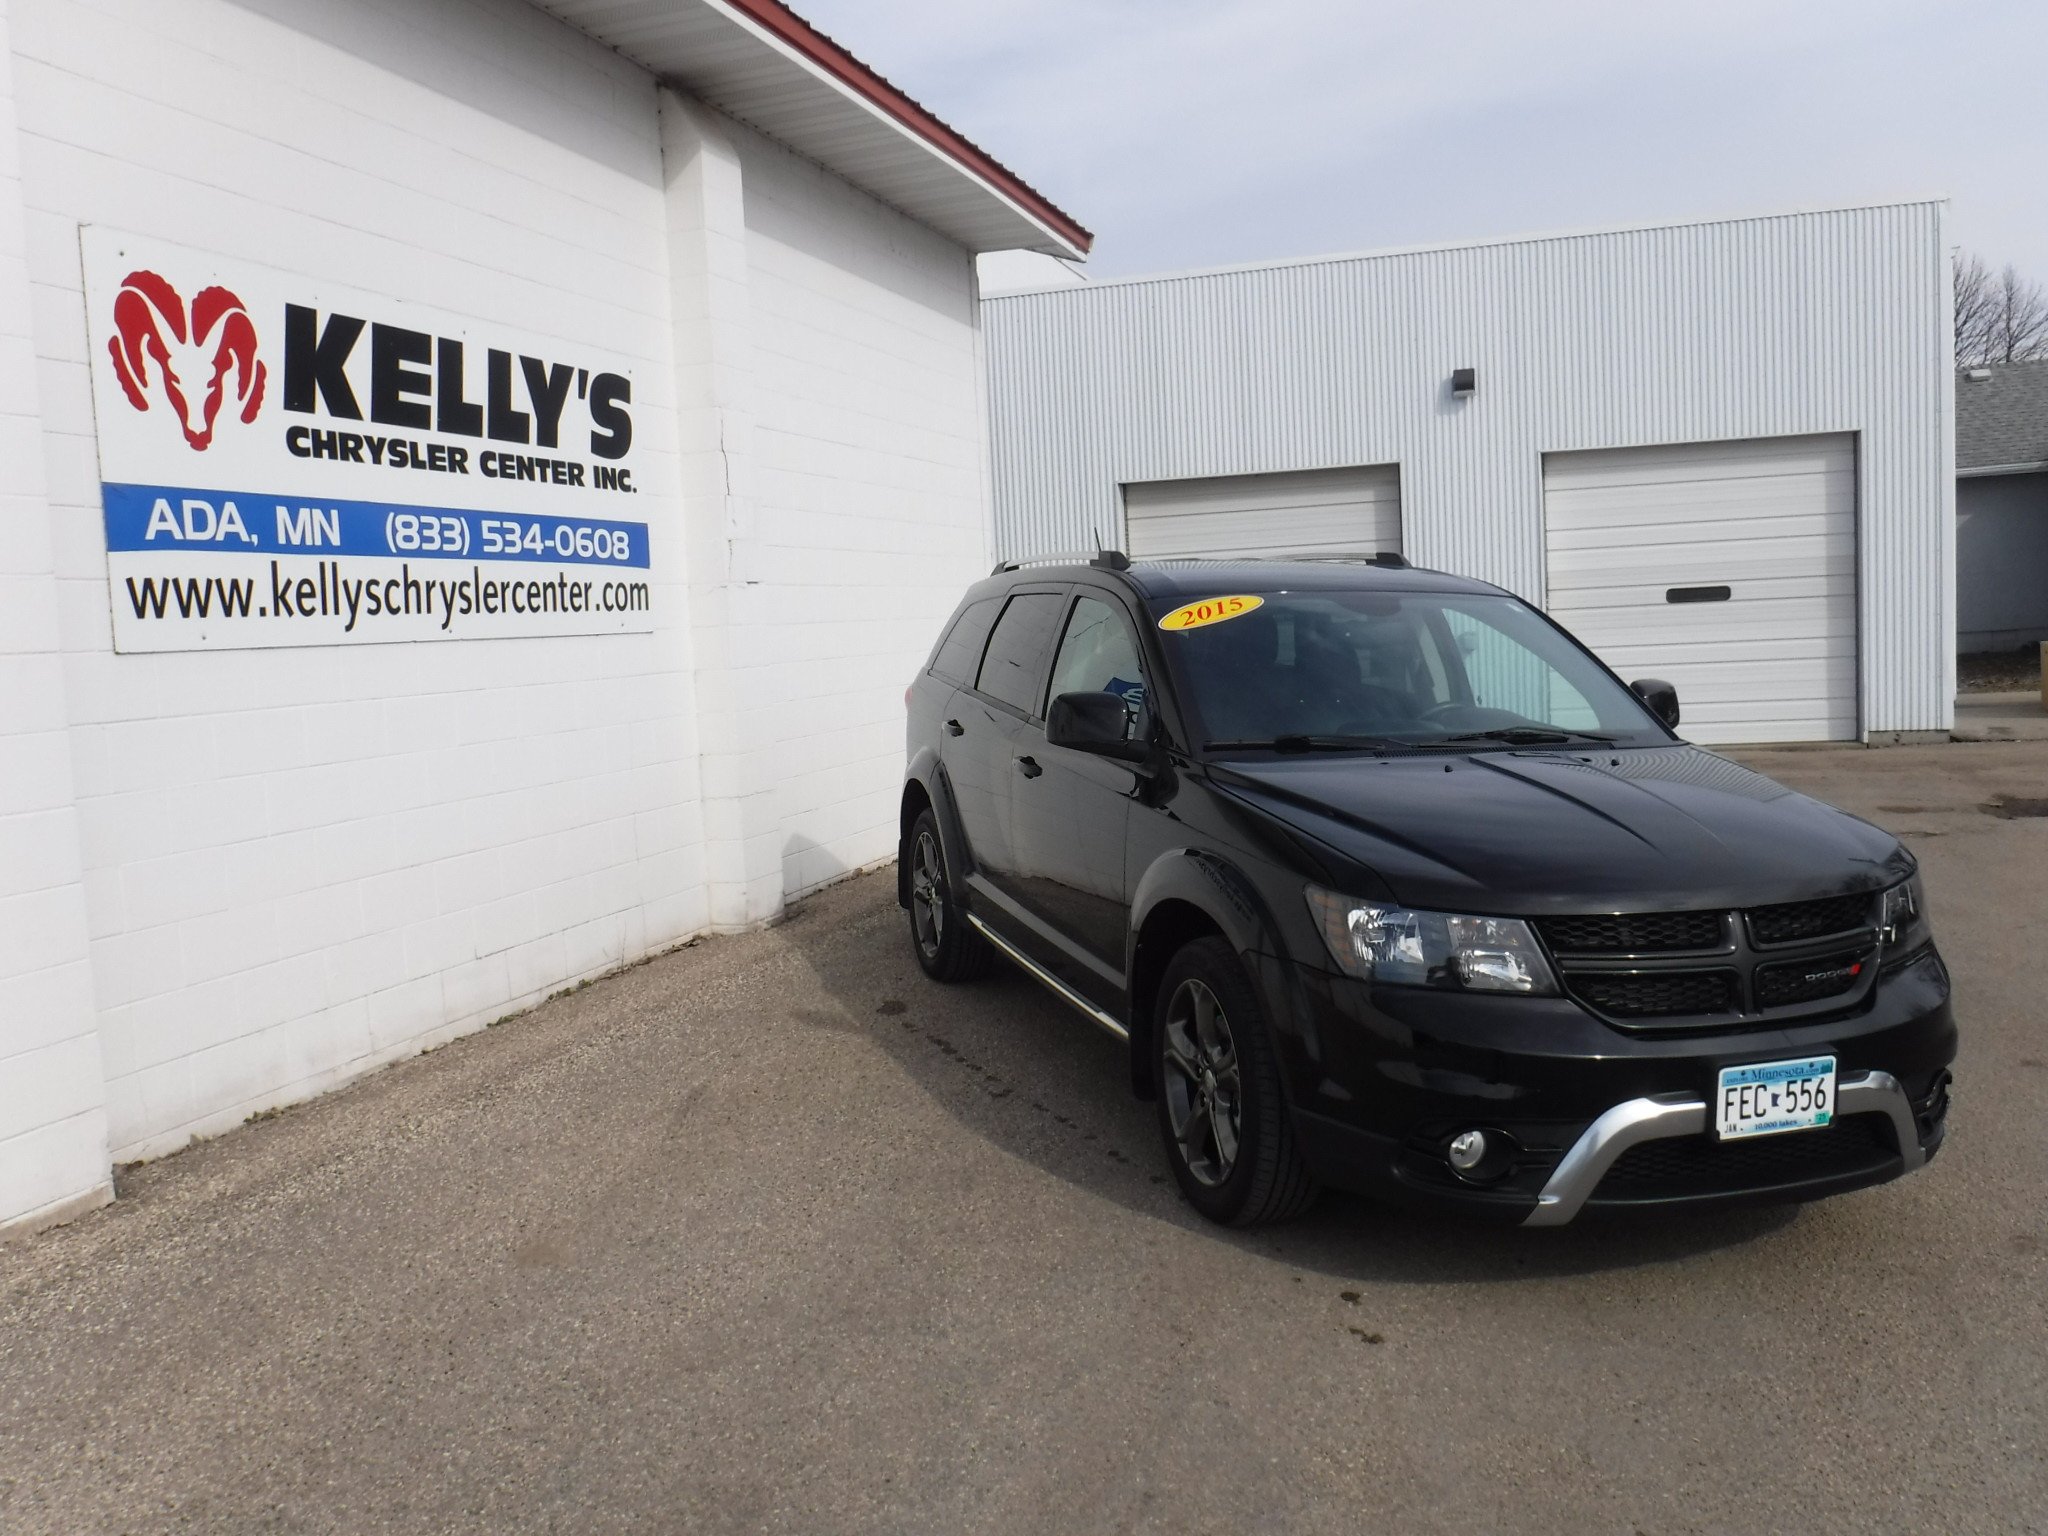 Used 2015 Dodge Journey CrossRoad with VIN 3C4PDDGG1FT566712 for sale in Ada, Minnesota